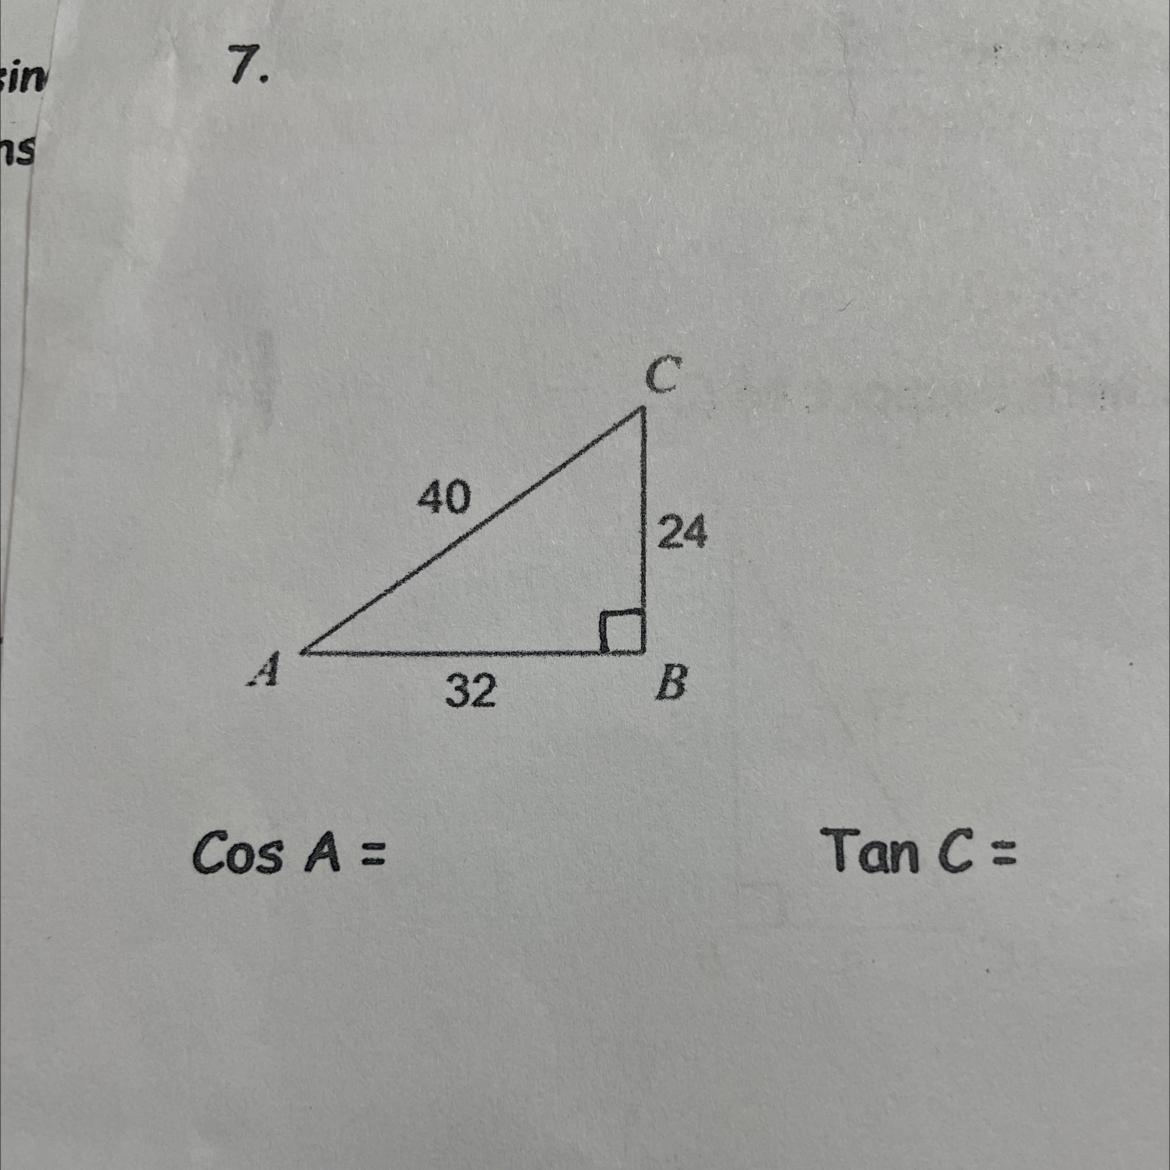 Using The Diagram ,state The Value Of The Given Trigonometric Ratio 